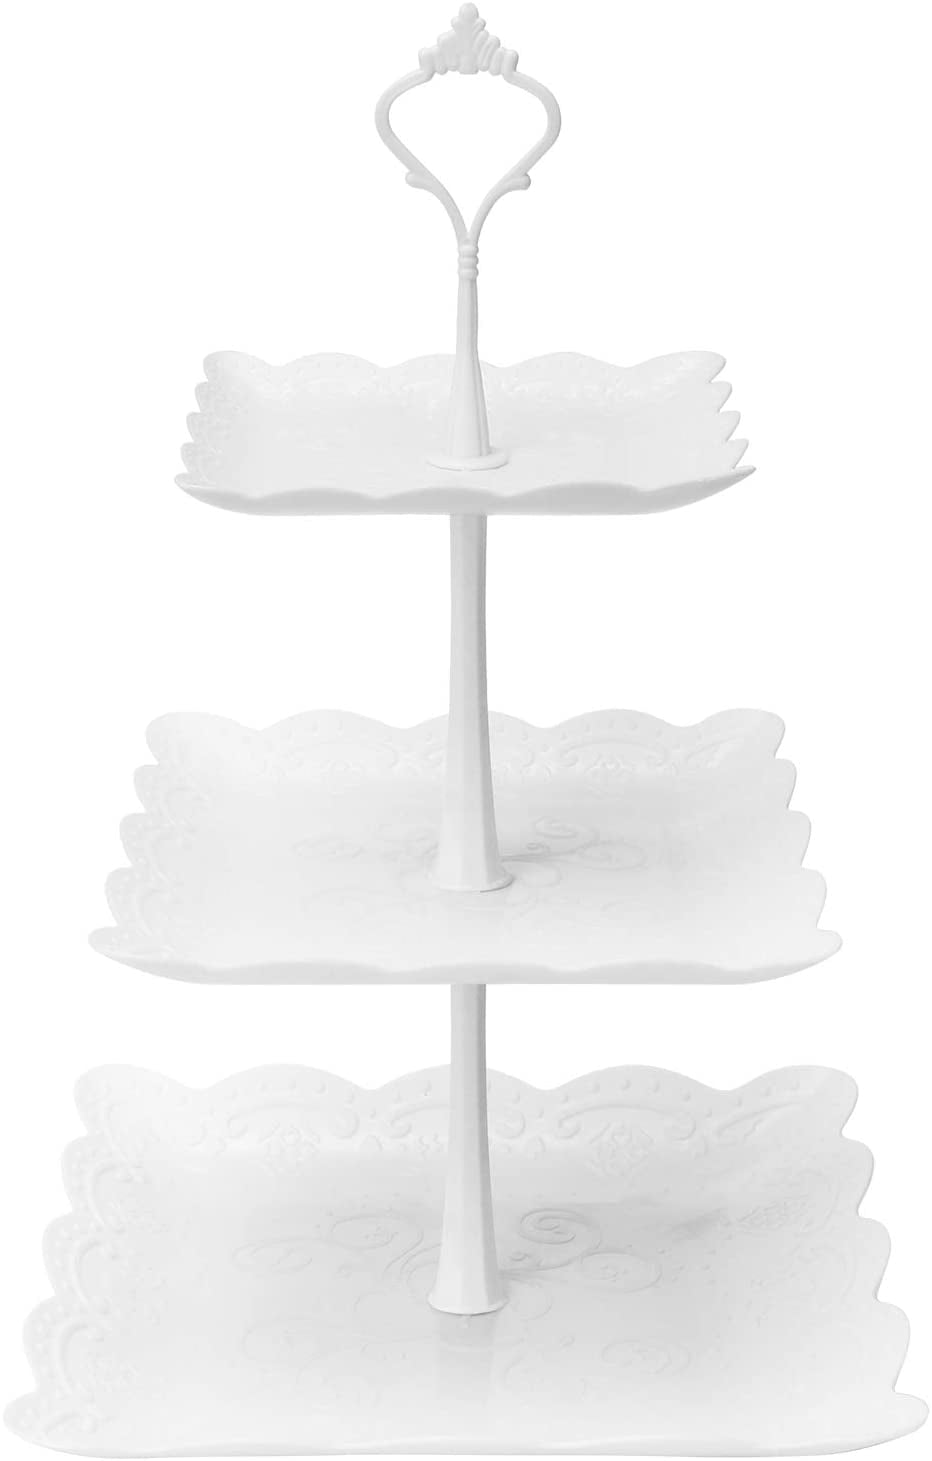 Dessert Tray with Carved Wooden Handle & Post 2 Tier Rustic Galvanized Metal Cupcake Display Stand